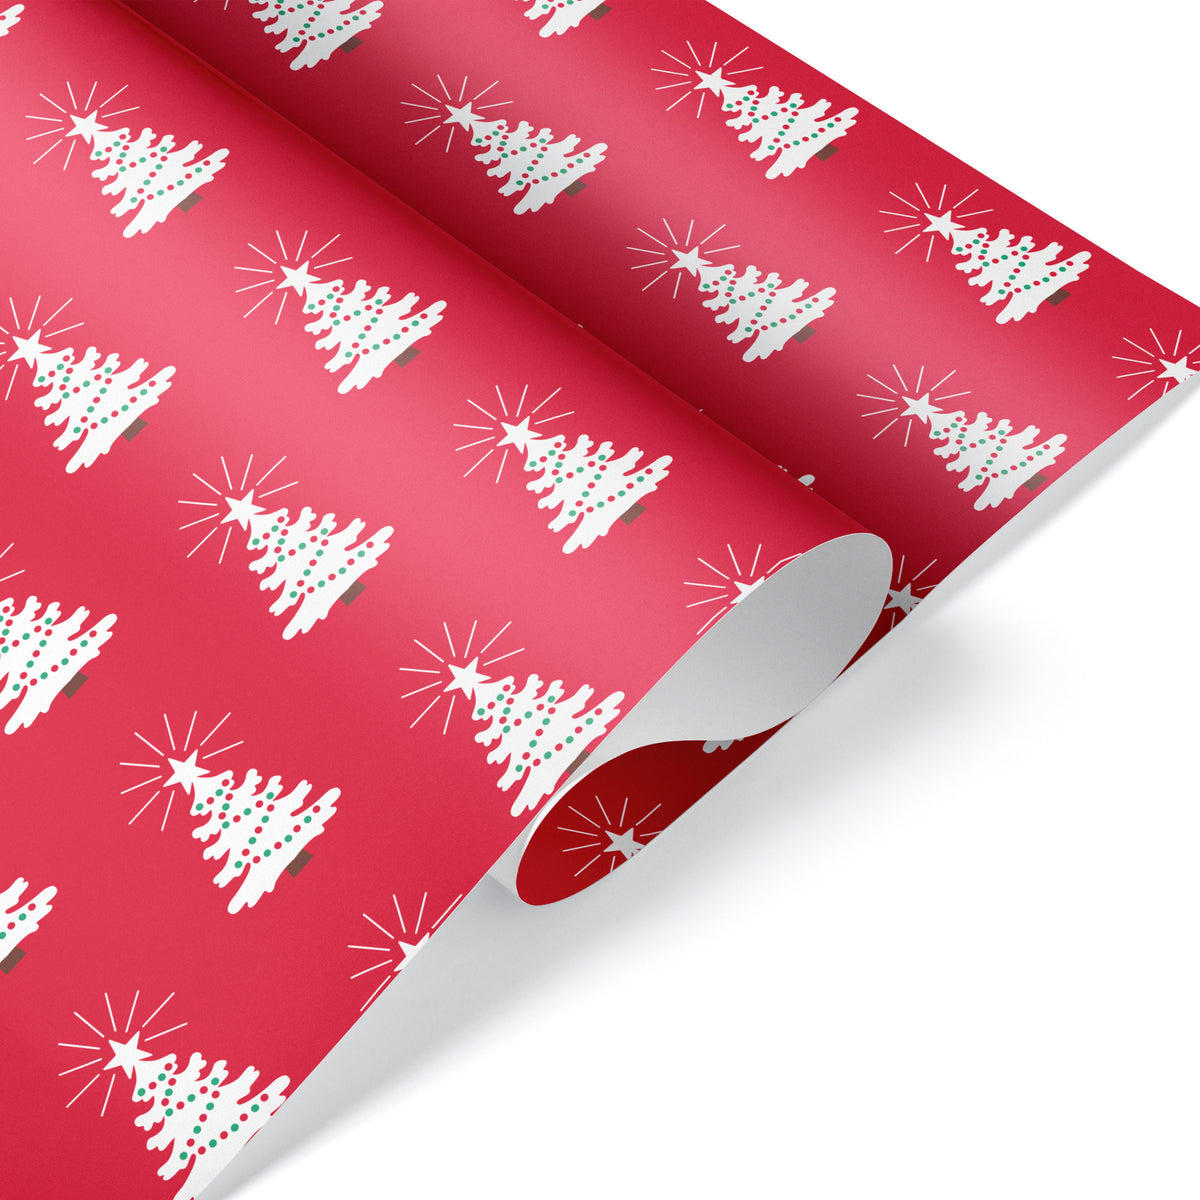 Set of 3 Assorted Christmas Wrapping Papers - TRADITIONAL